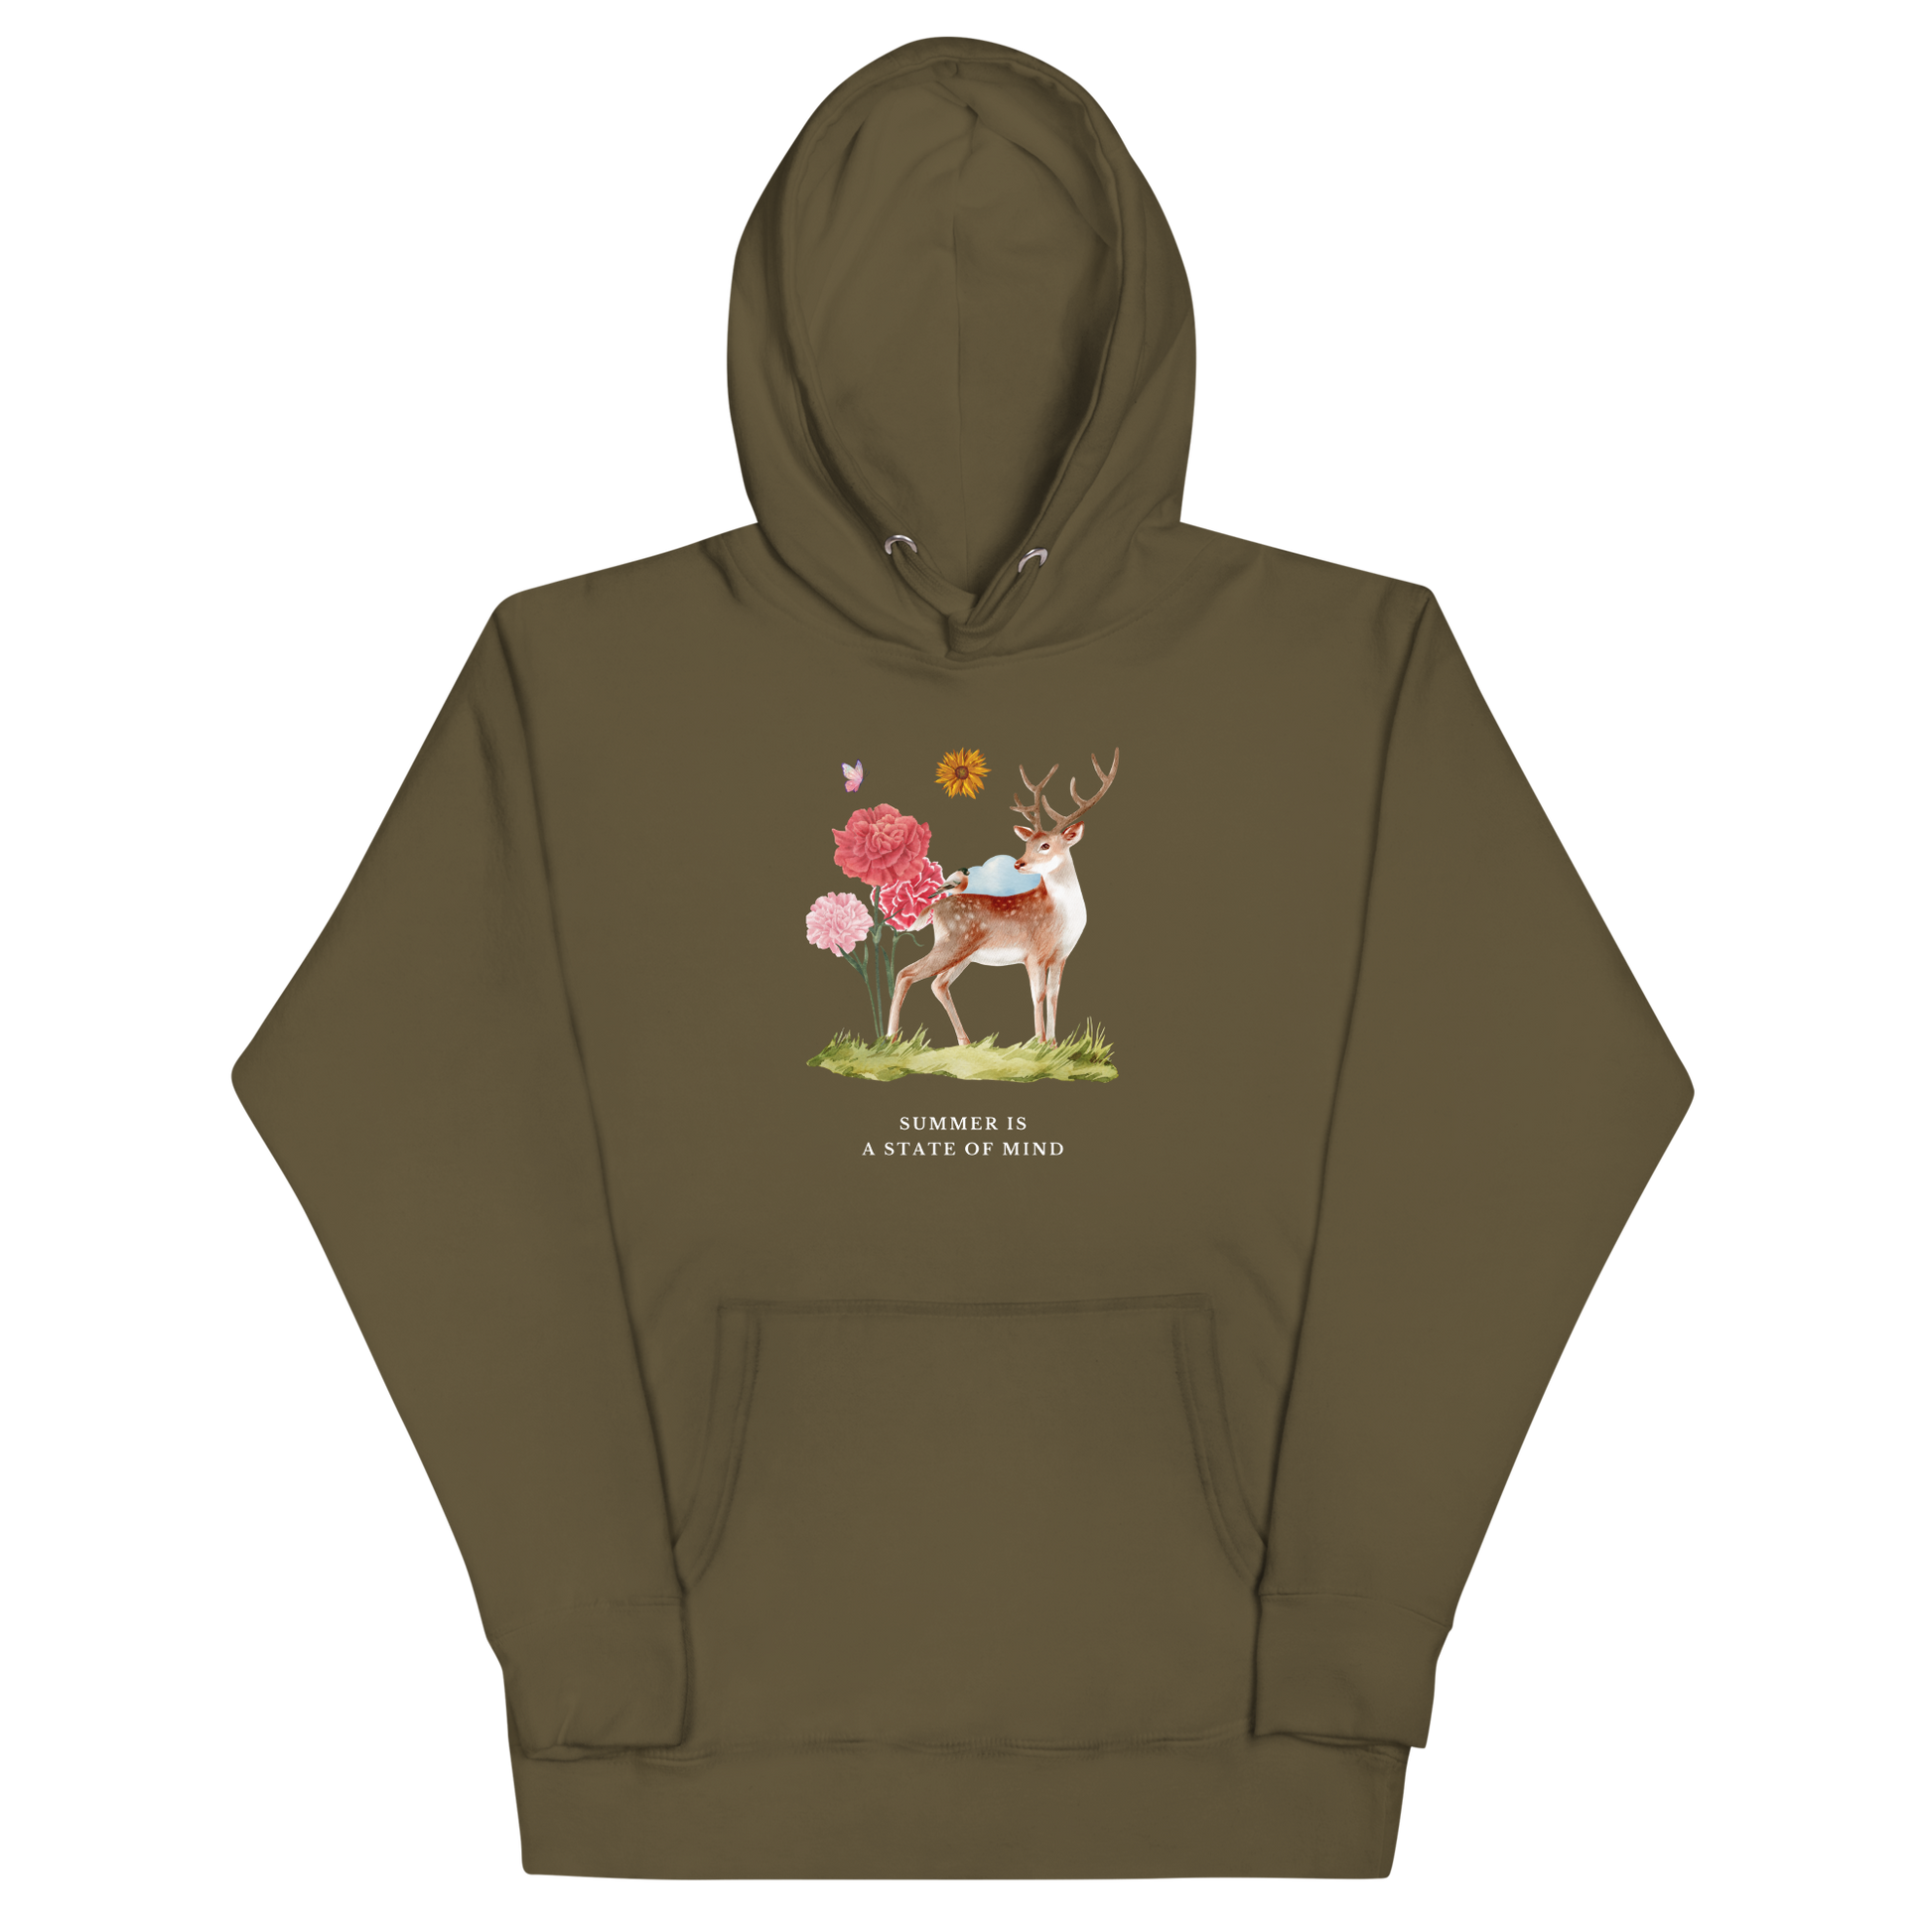 Military Green Premium Summer Is a State of Mind Hoodie showcasing a Summer Is a State of Mind graphic on the chest - Cute Graphic Summer Hoodies - Boozy Fox